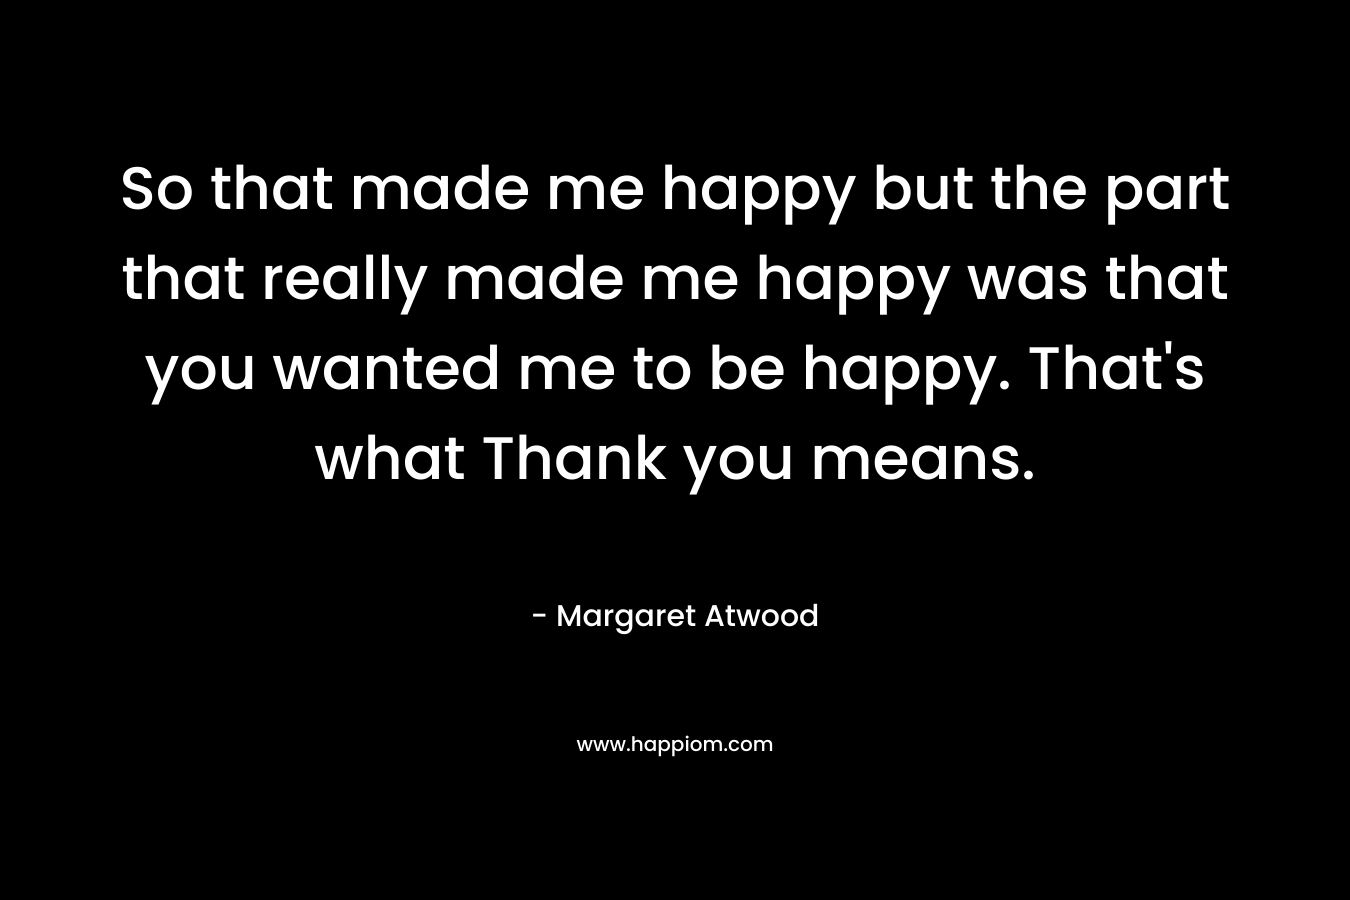 So that made me happy but the part that really made me happy was that you wanted me to be happy. That’s what Thank you means. – Margaret Atwood